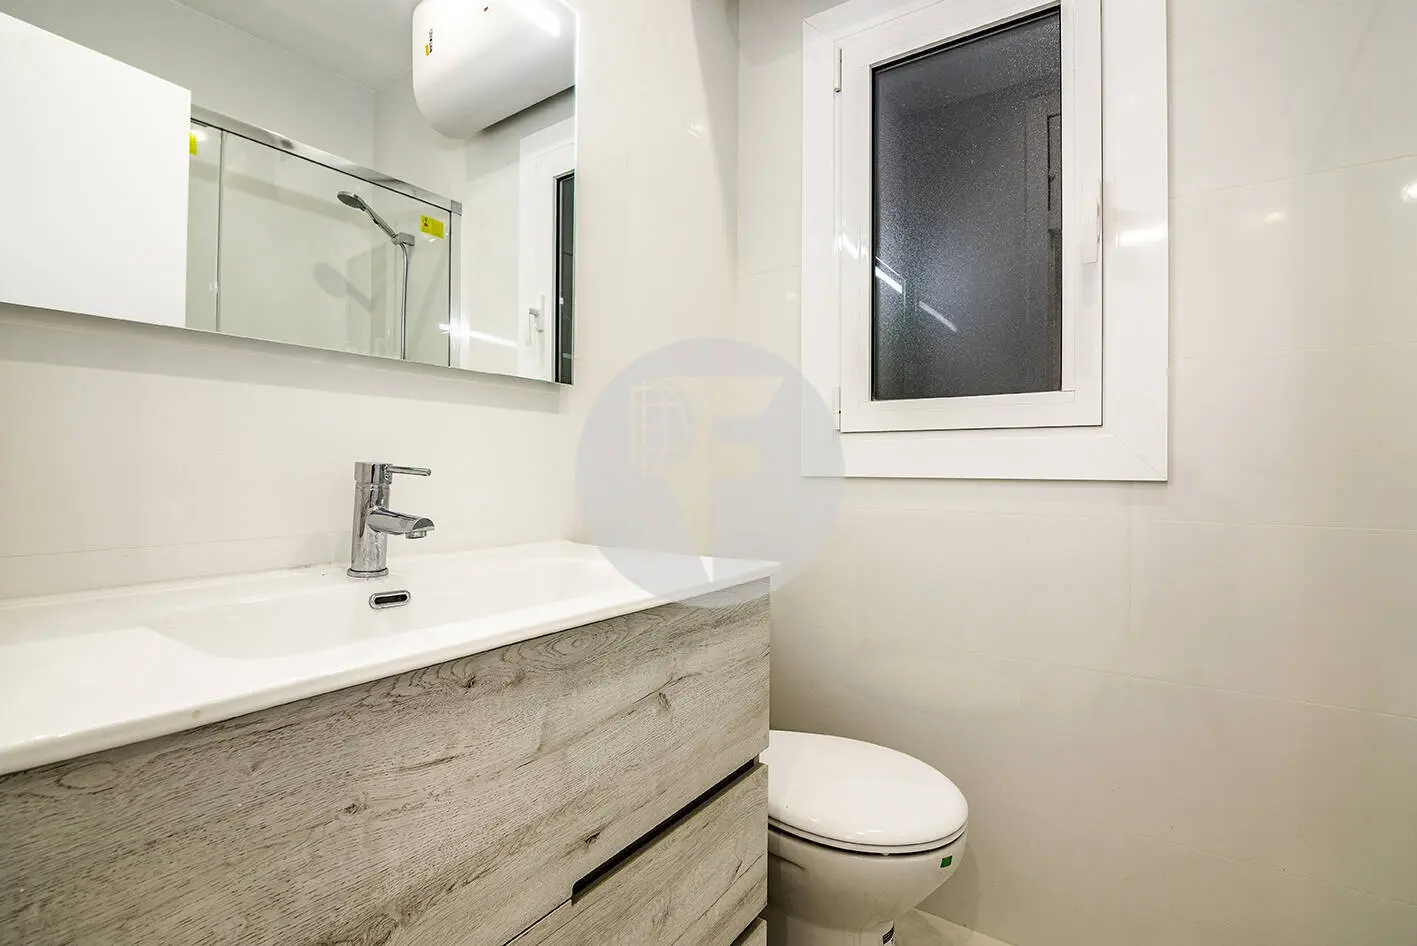 Brand new completely renovated apartment on Aragó street in the heart of El Clot in Barcelona. 23